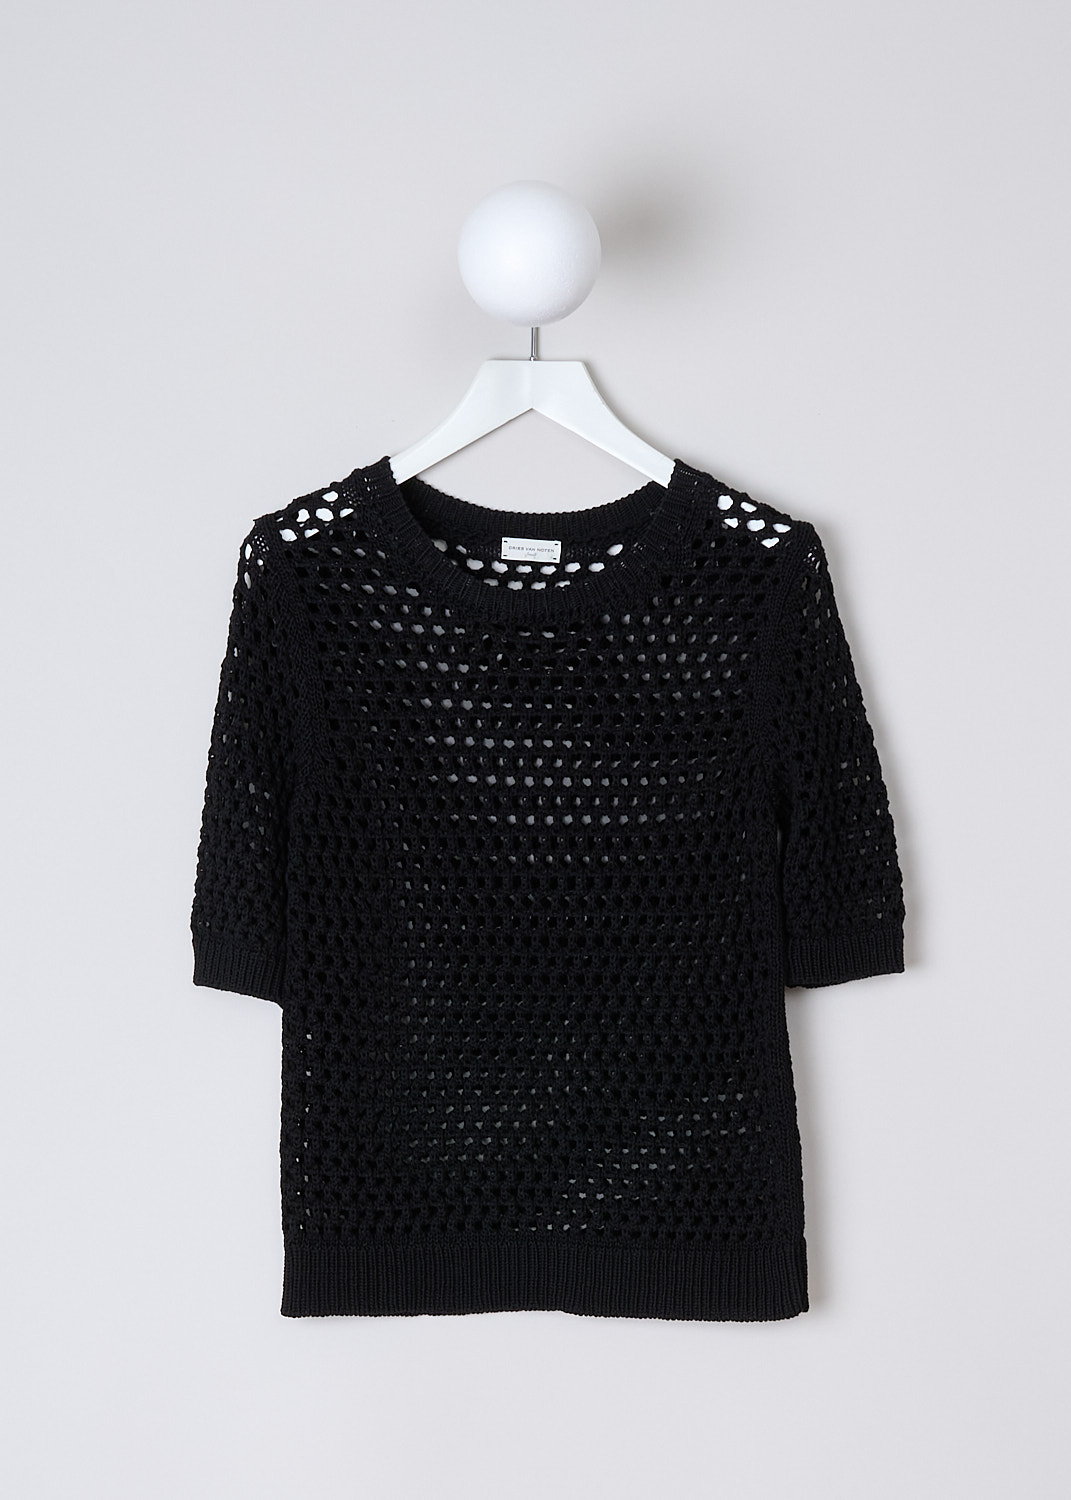 DRIES VAN NOTEN, BLACK OPEN-KNIT TILIA SWEATER, 
TILIA_6713_WK_SWEATER_BLACK, Black, Front, This black open-knit Tilia sweater has a round neckline. The top has three-quarter sleeves with ribbed cuffs. The hemline is also ribbed. 
